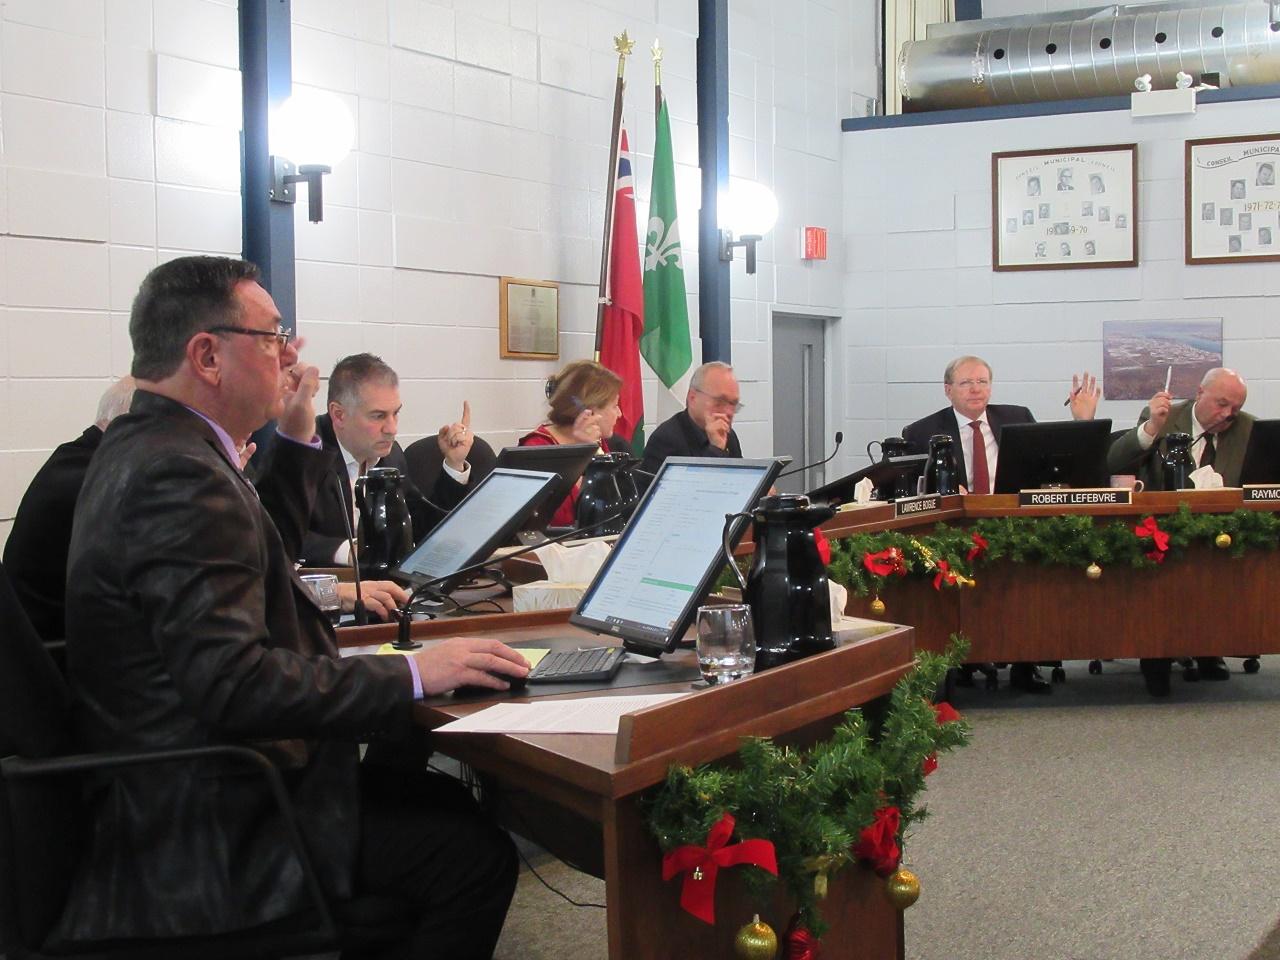 Hawkesbury council approves 2020 budget, town will collect 2.83 per cent more in taxes